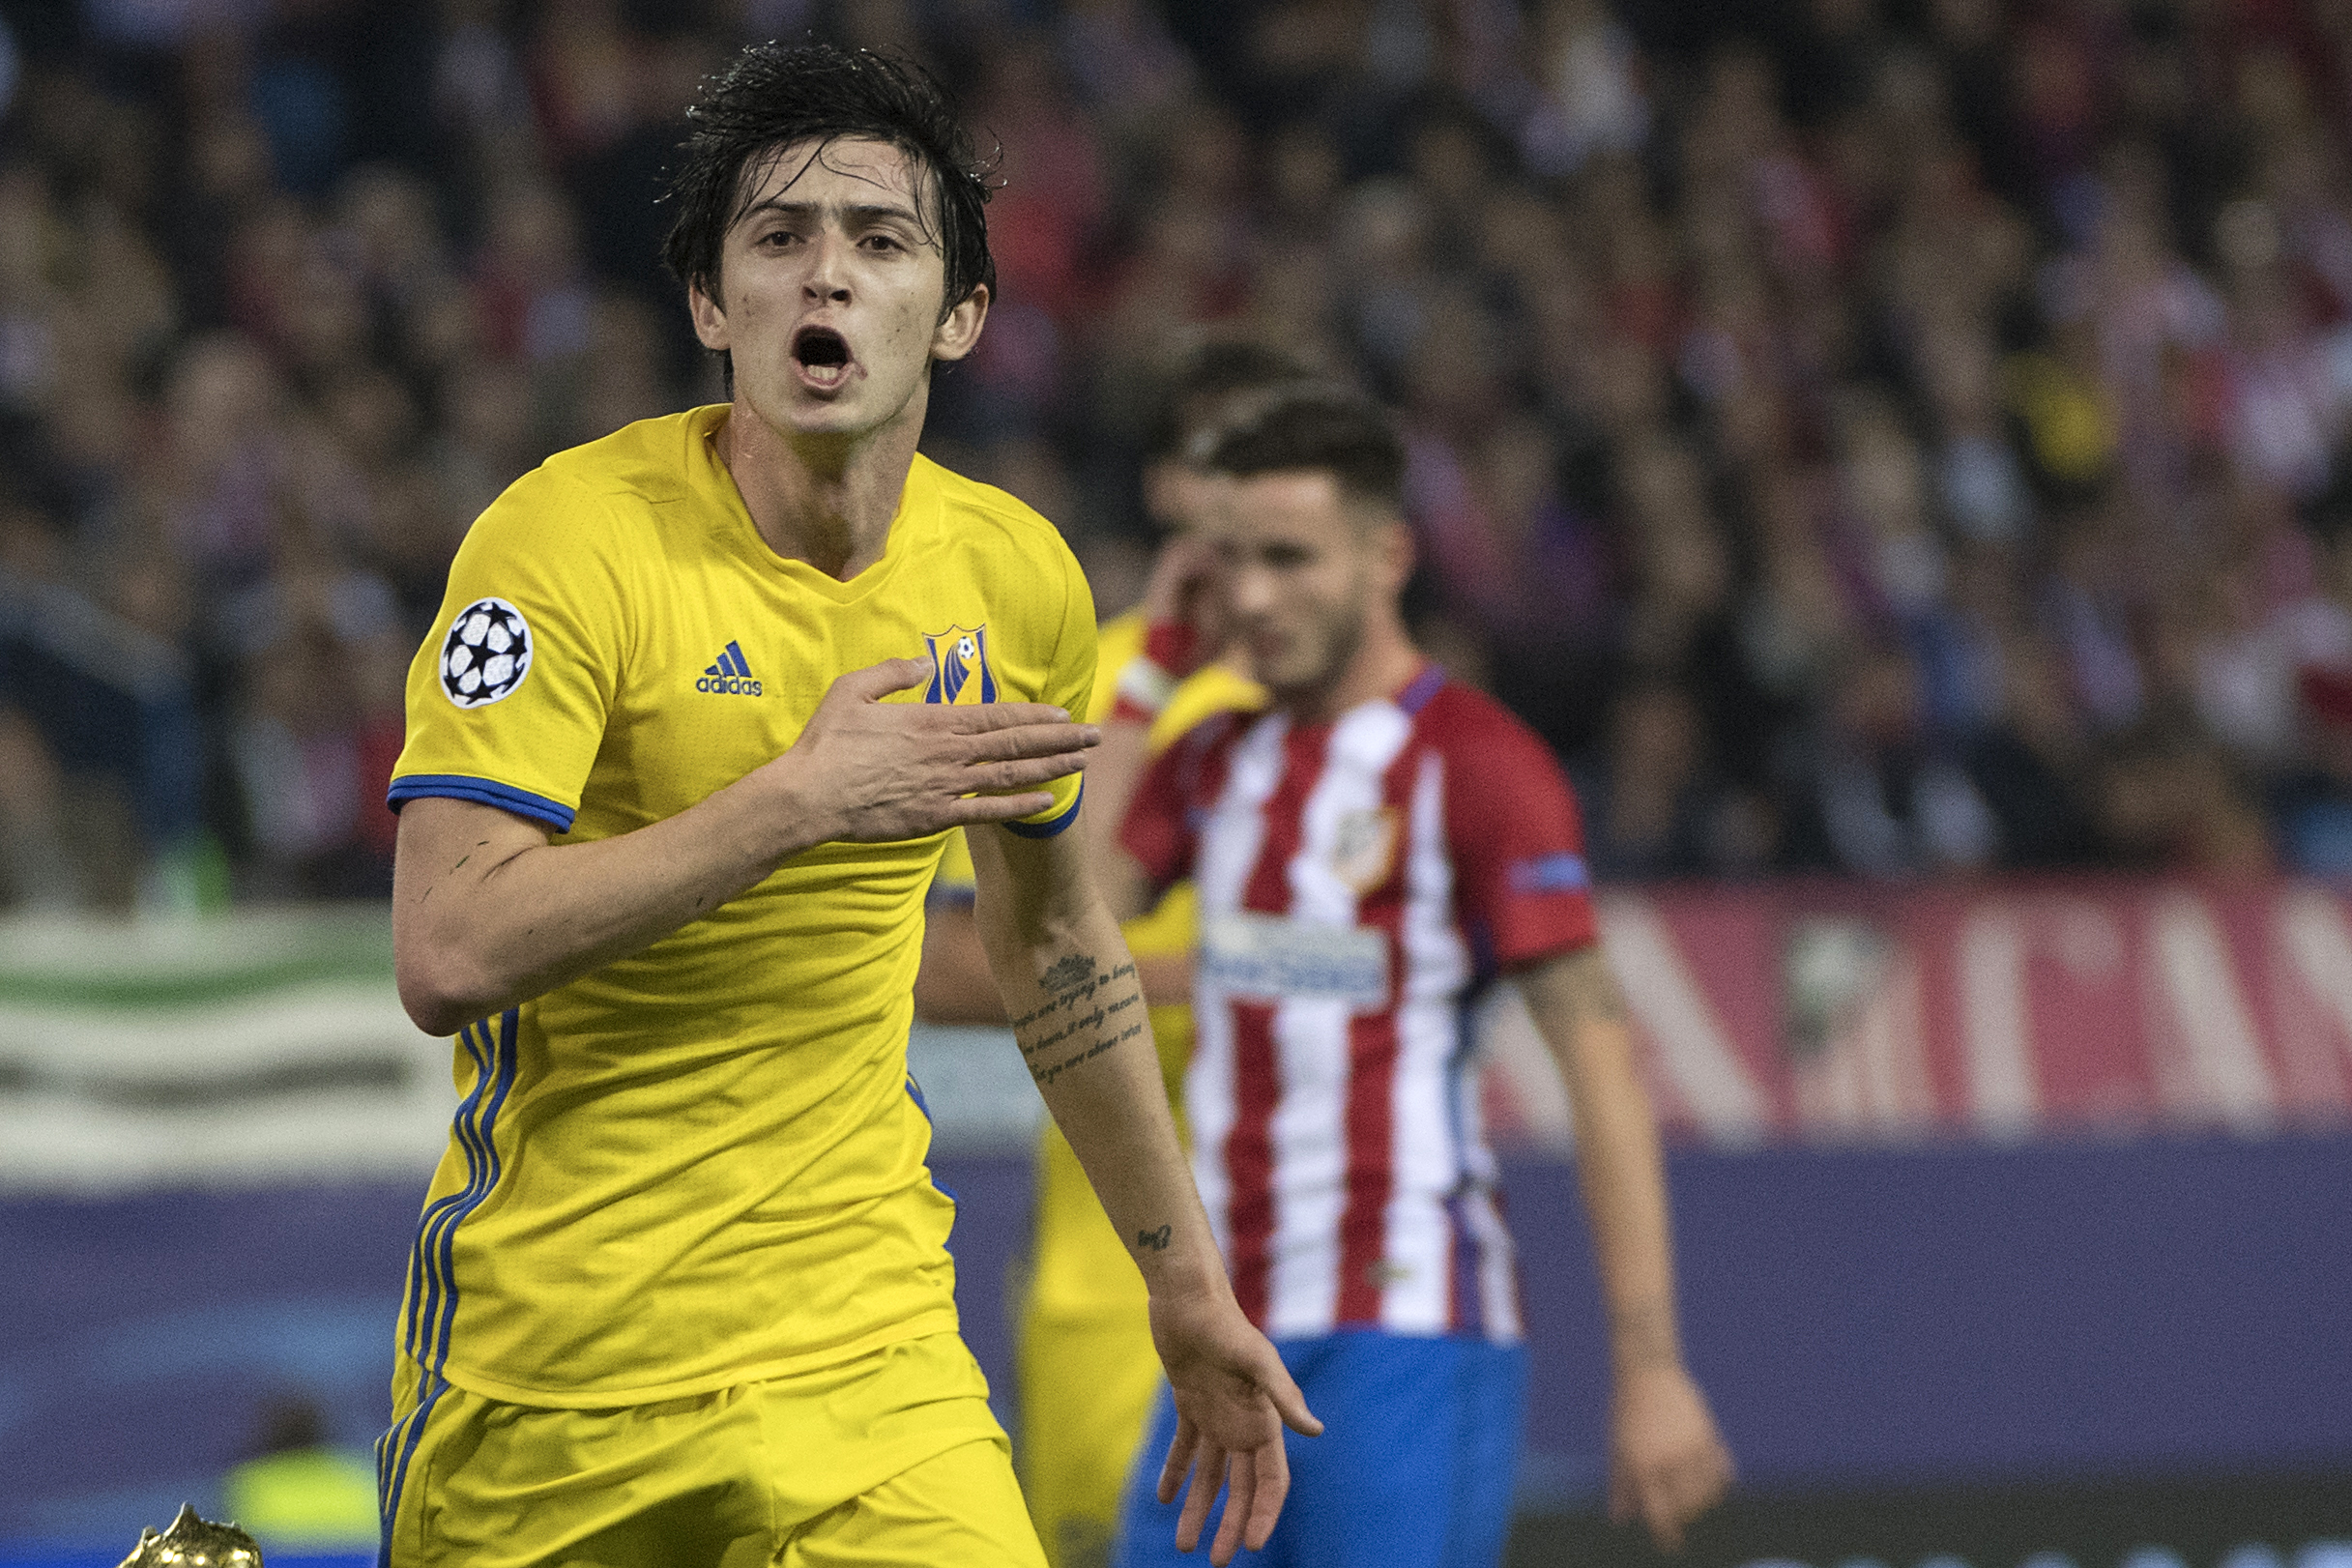 Azmoun caught the eye with his display against Atletico Madrid in the Champions League, capping it off with a goal and is generally showing a lot of promise. (Picture Courtesy - AFP/Getty Images)